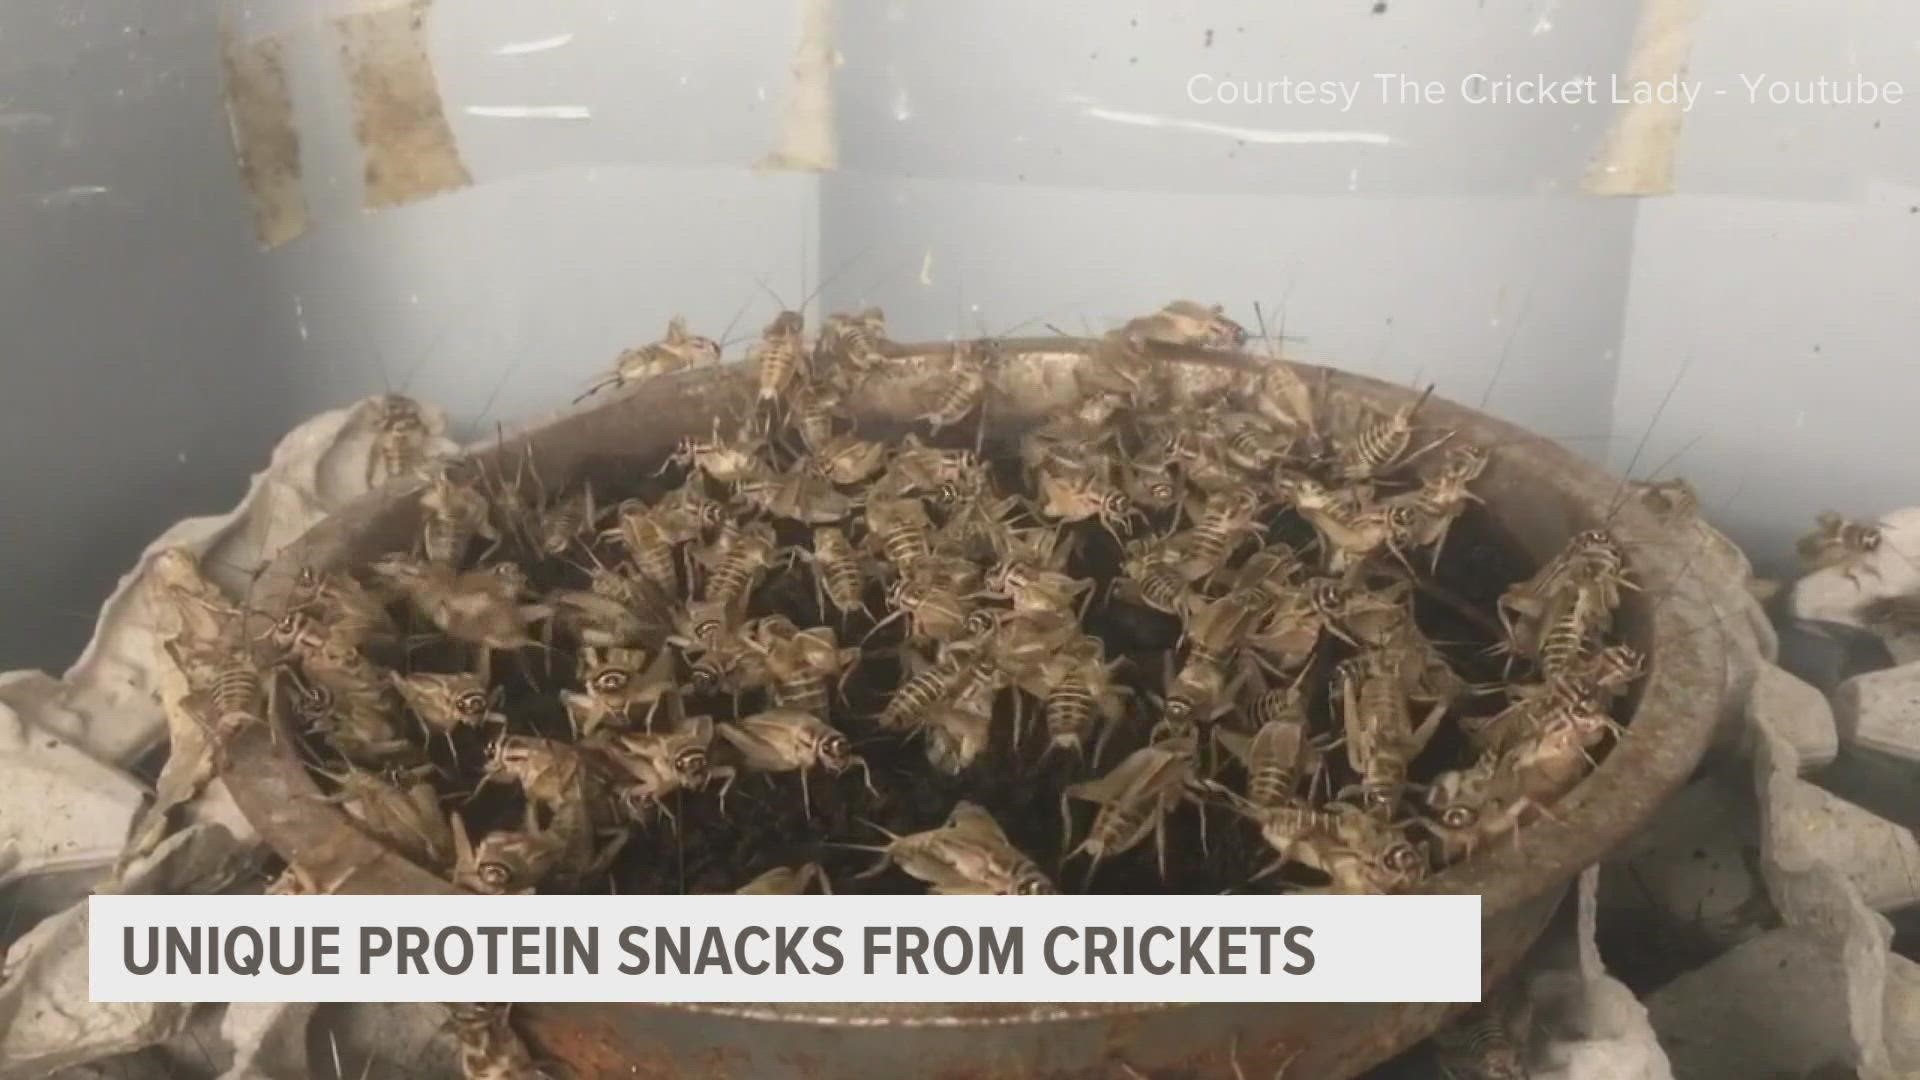 Based in Ames, Gym-N-Eats Crickets makes sustainable alternative protein snacks from farm-raised crickets.